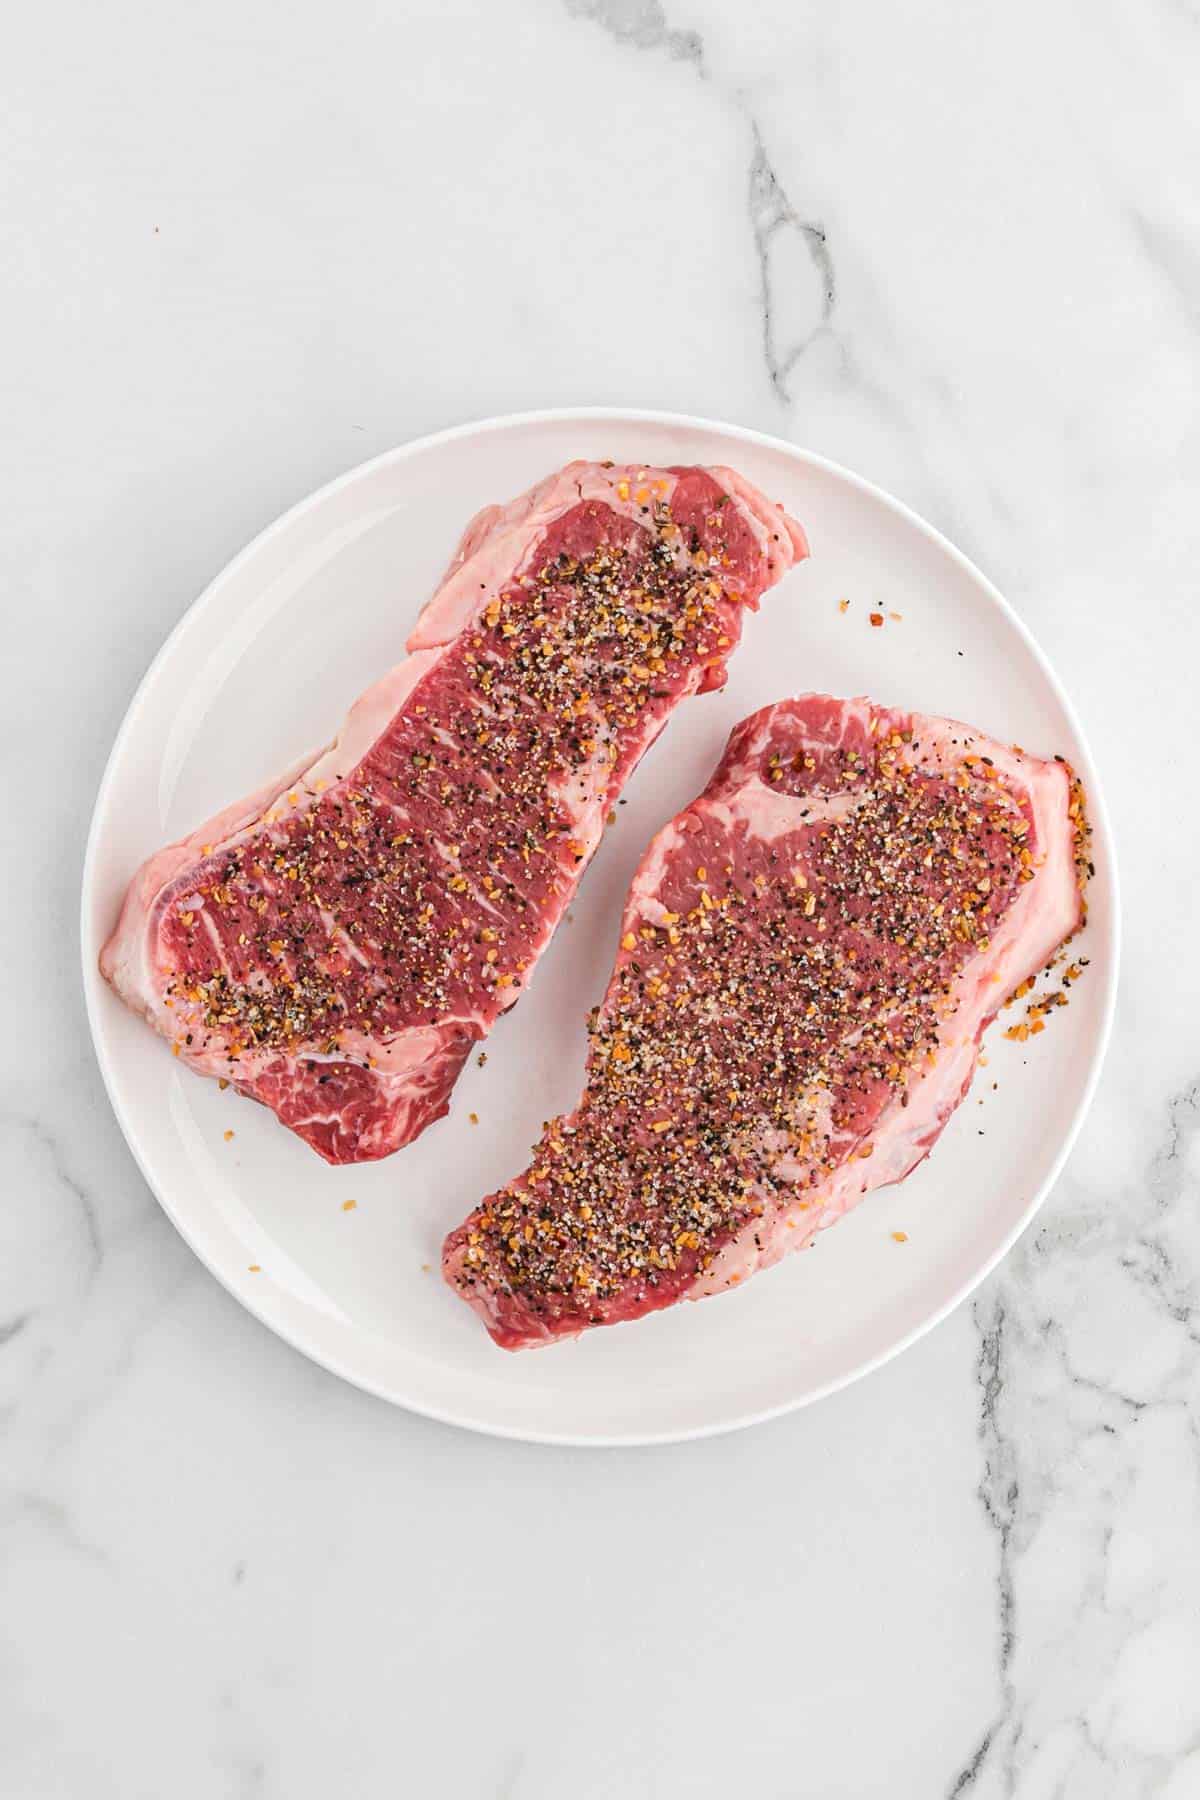 Steaks on a plate are sprinkled with seasoning before cooking.